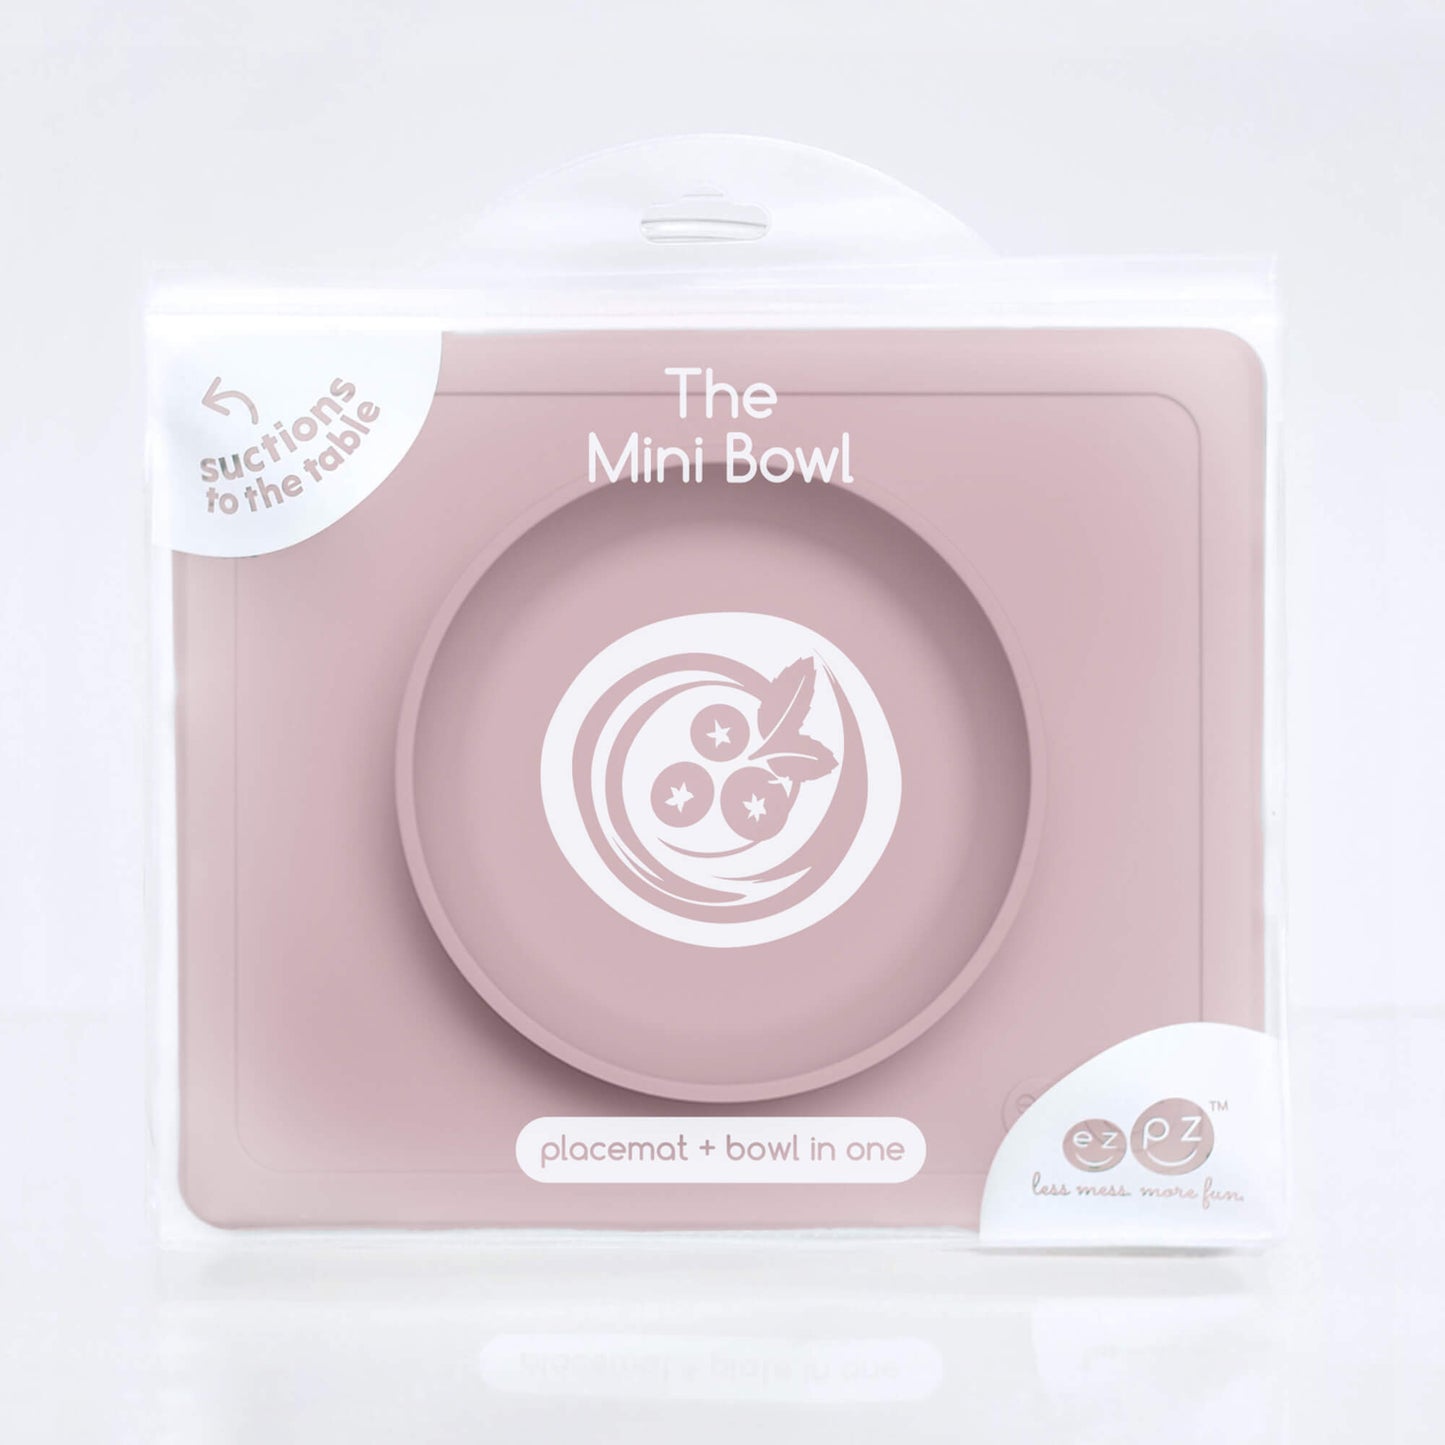 Mini Bowl in Blush by ezpz / The Original All-In-One Silicone Plates & Placemats that Stick to the Table